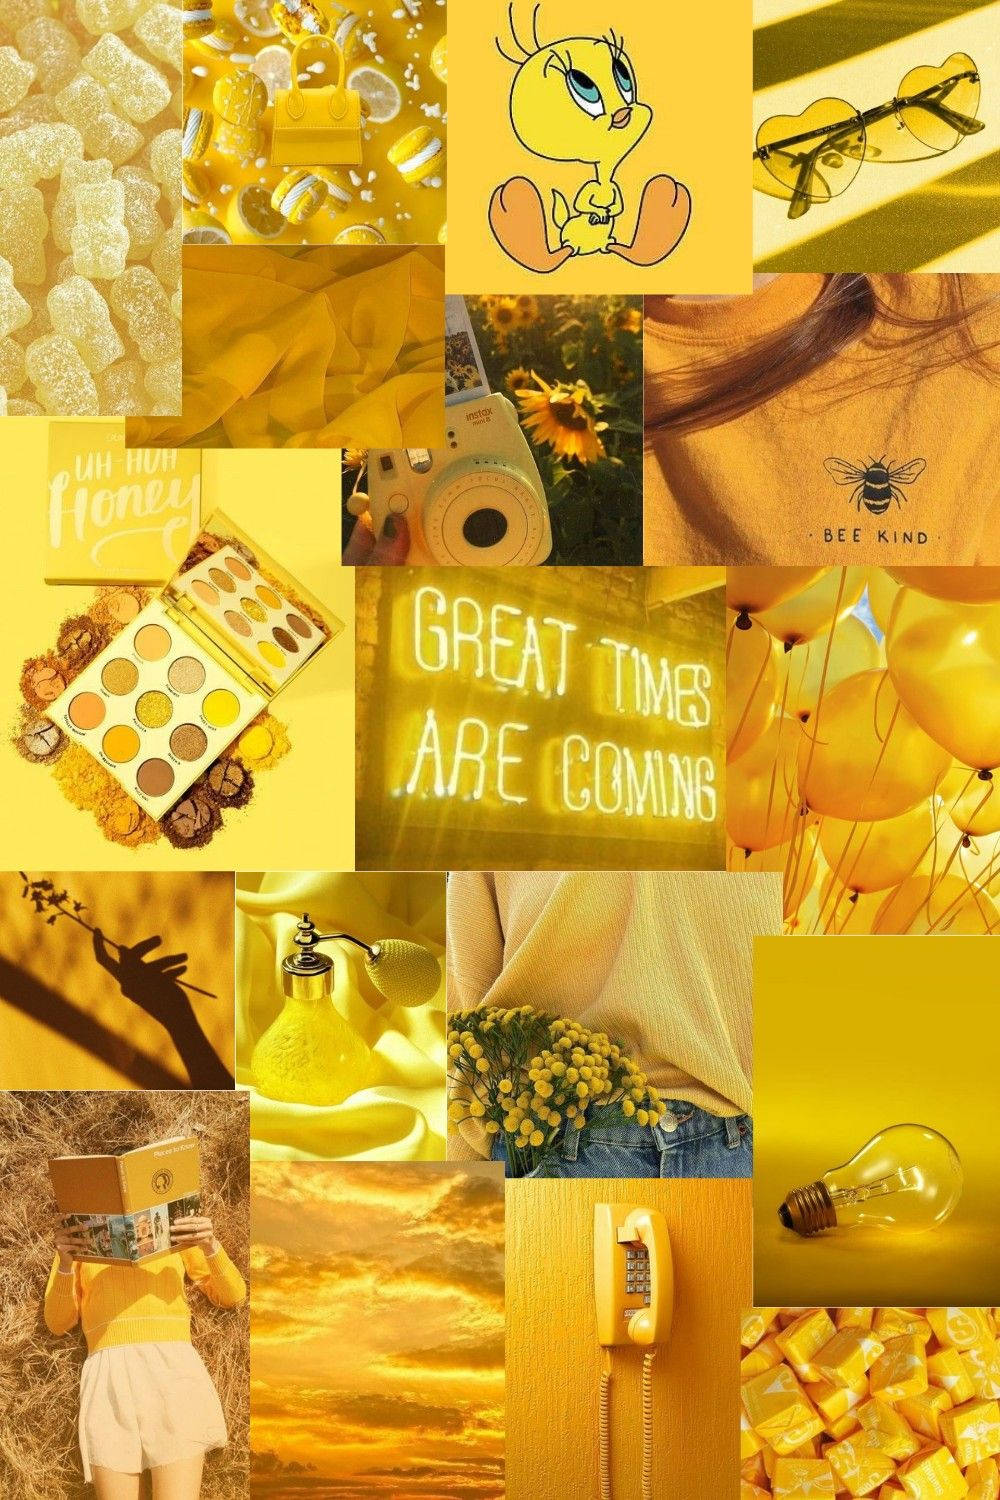 Brighten Up Your Day With This Happy Yellow Aesthetic Background